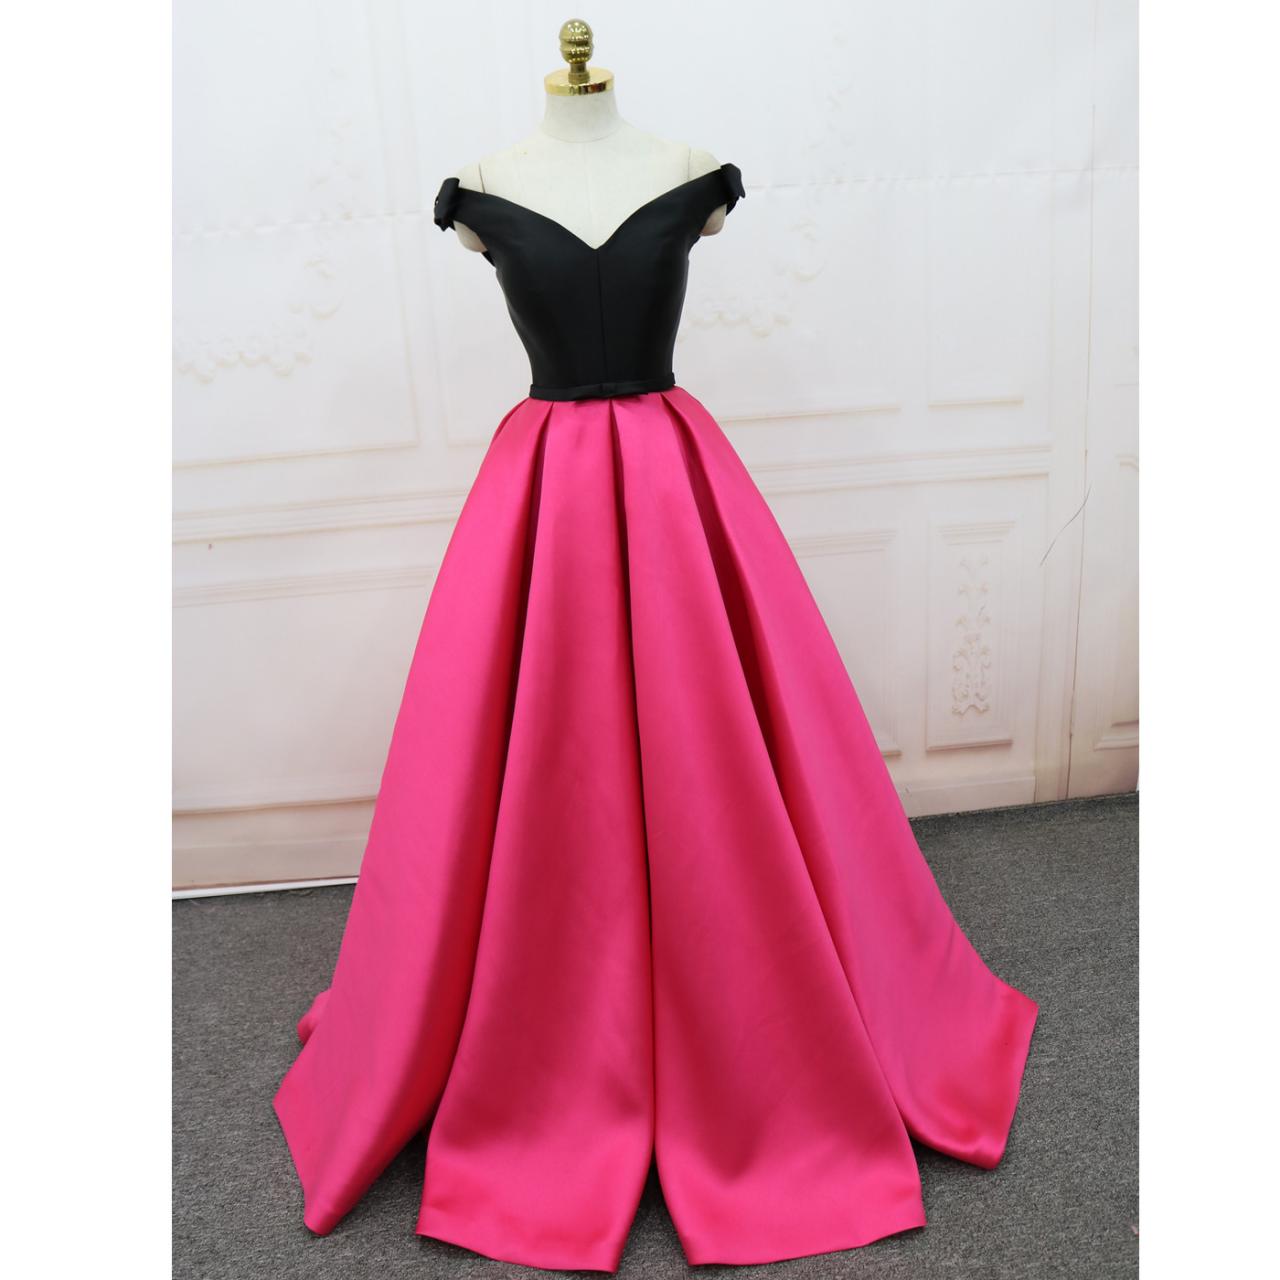 Fuchsia And Black Satin A-line Party Dress, Beautiful Formal Gowns, Prom Dress 2018